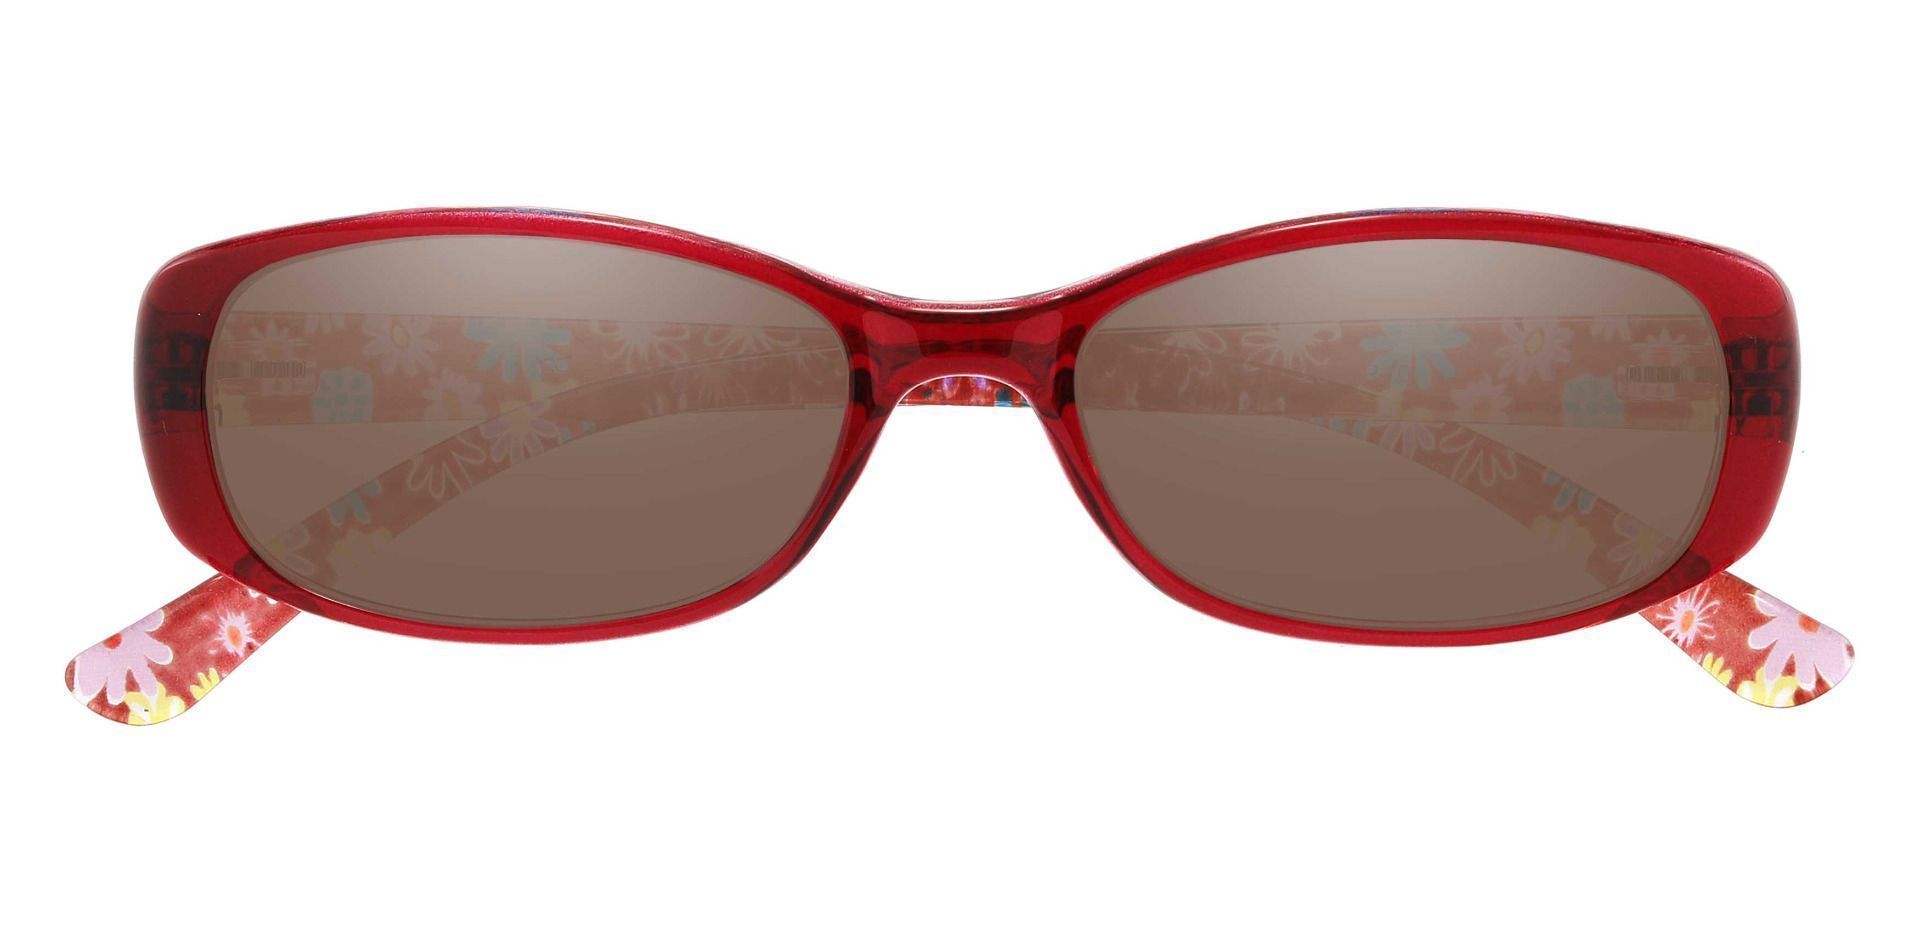 Bethesda Rectangle Prescription Sunglasses - Red Frame With Brown Lenses